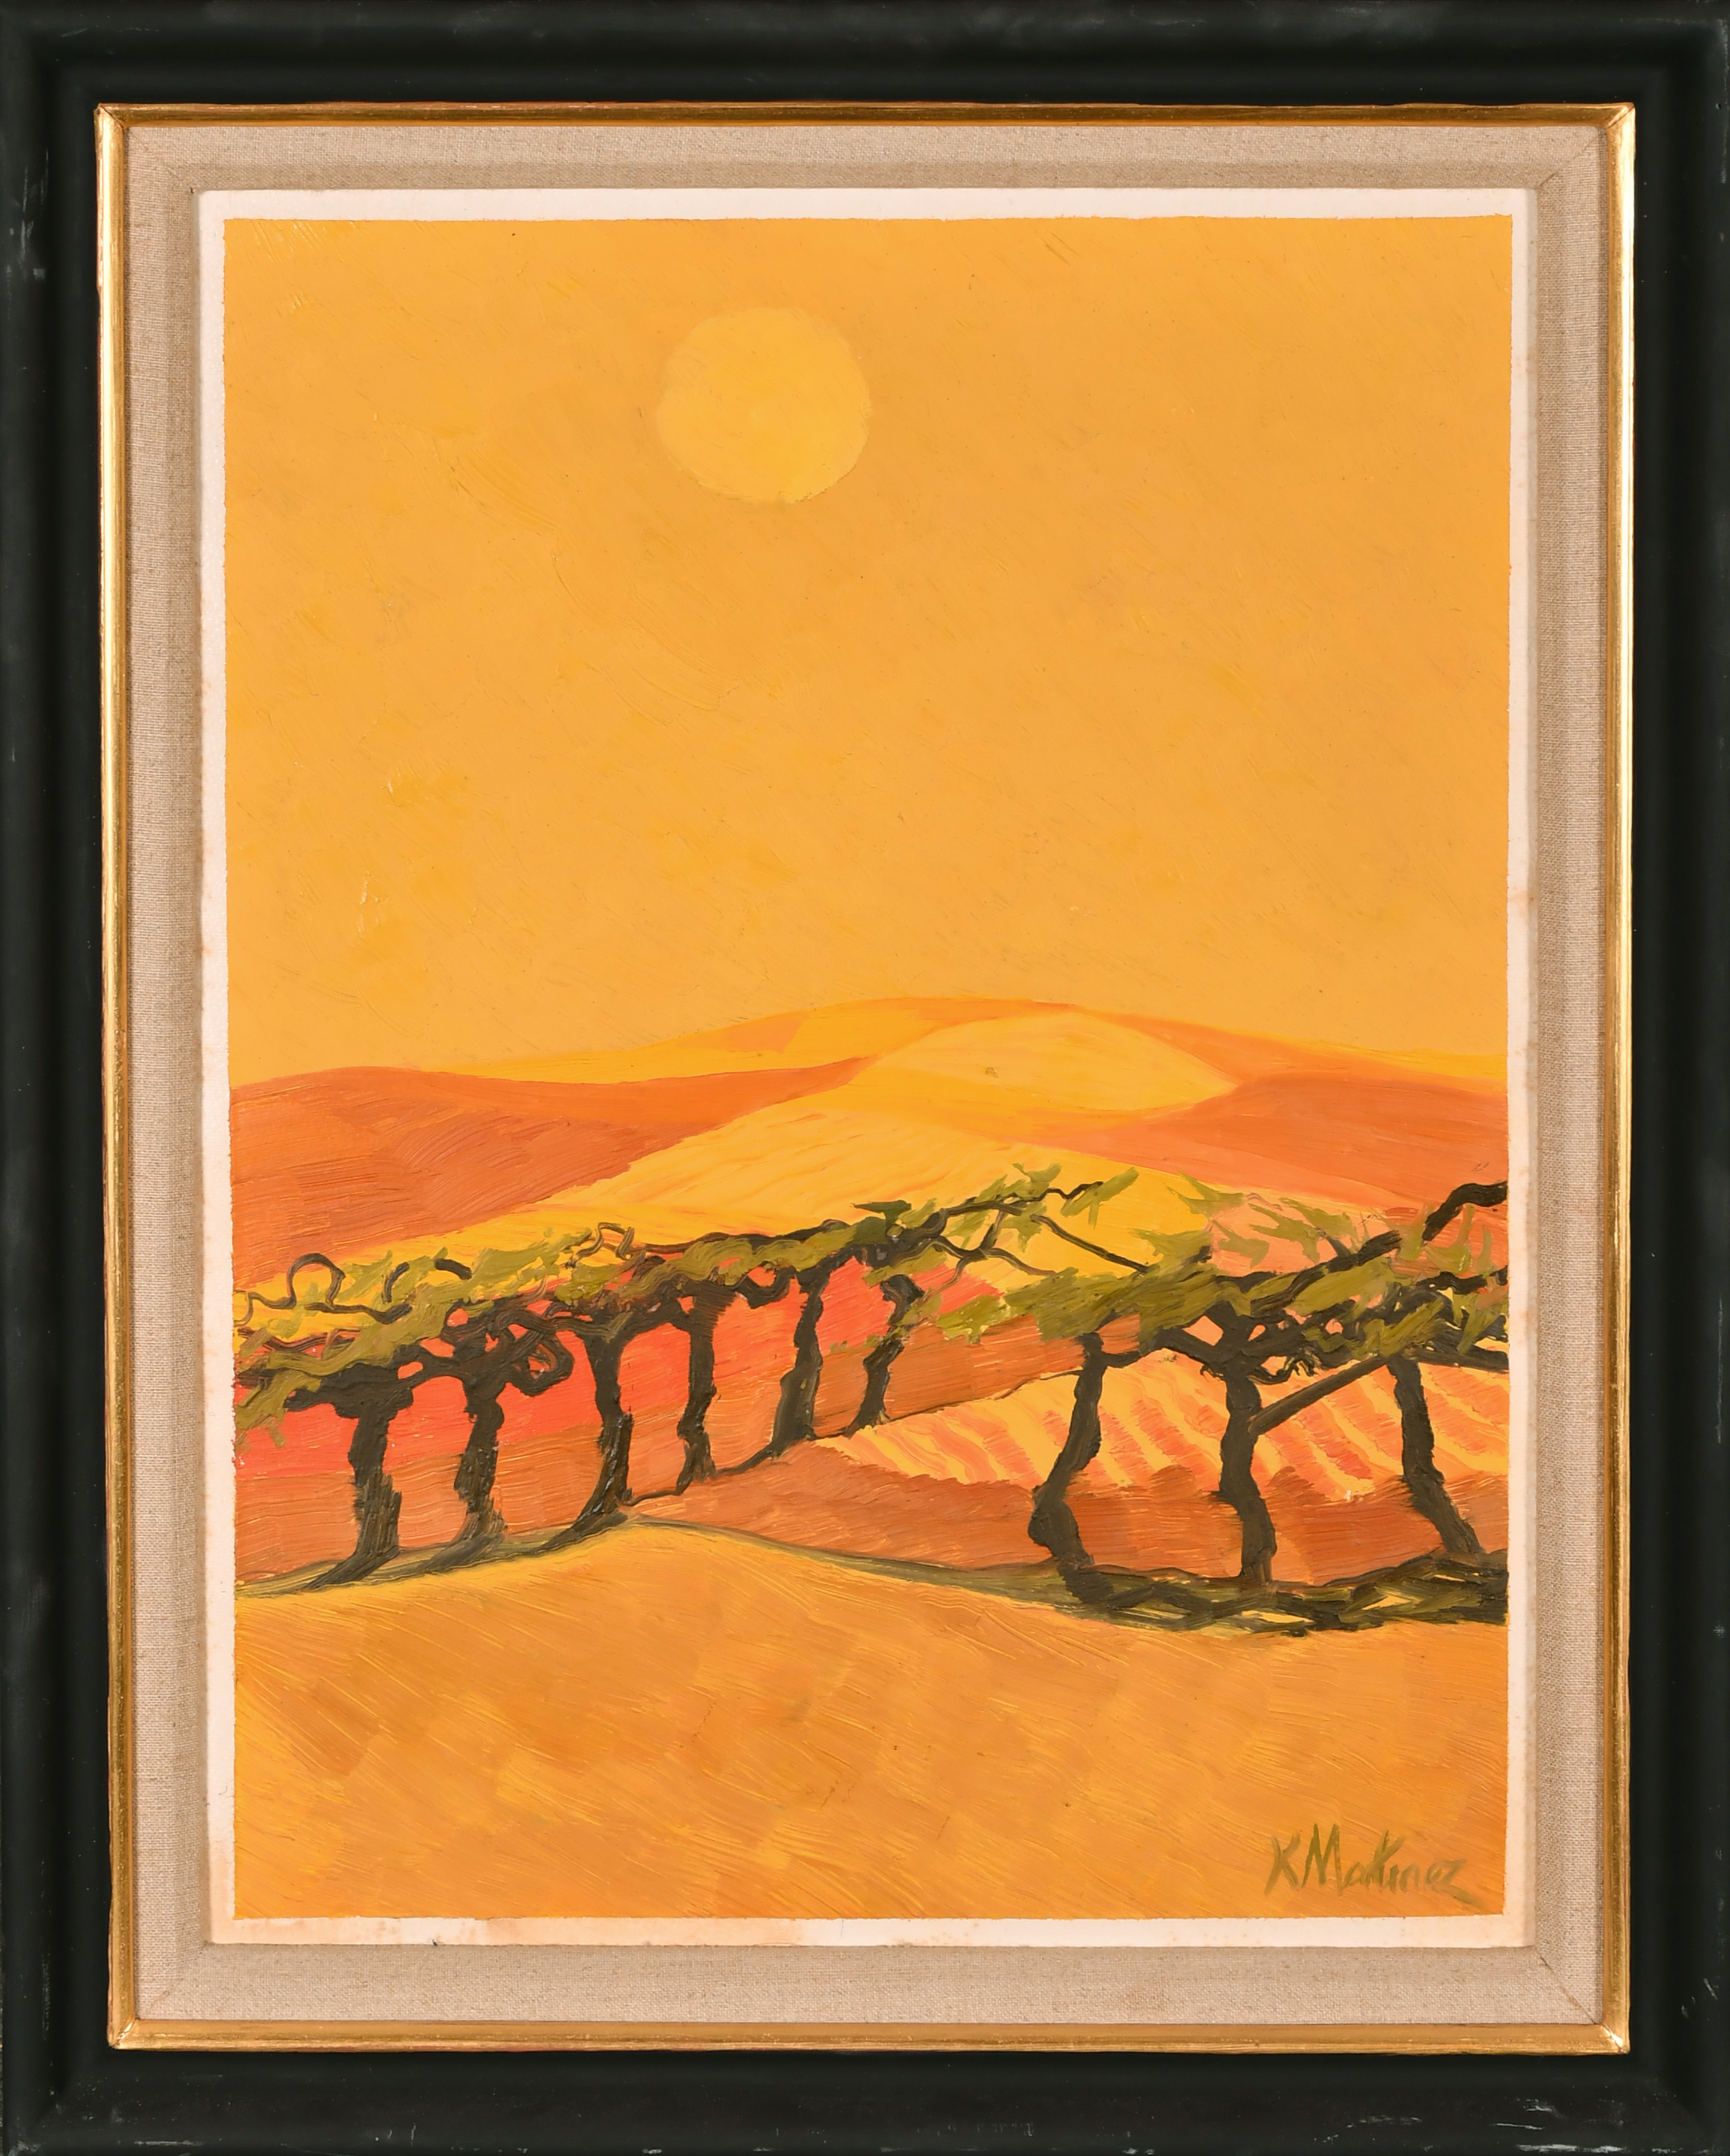 Raymond Martinez (1889-1969) Italian. "Monte Ontaneto", Oil on board, Signed, and inscribed on a - Image 2 of 5